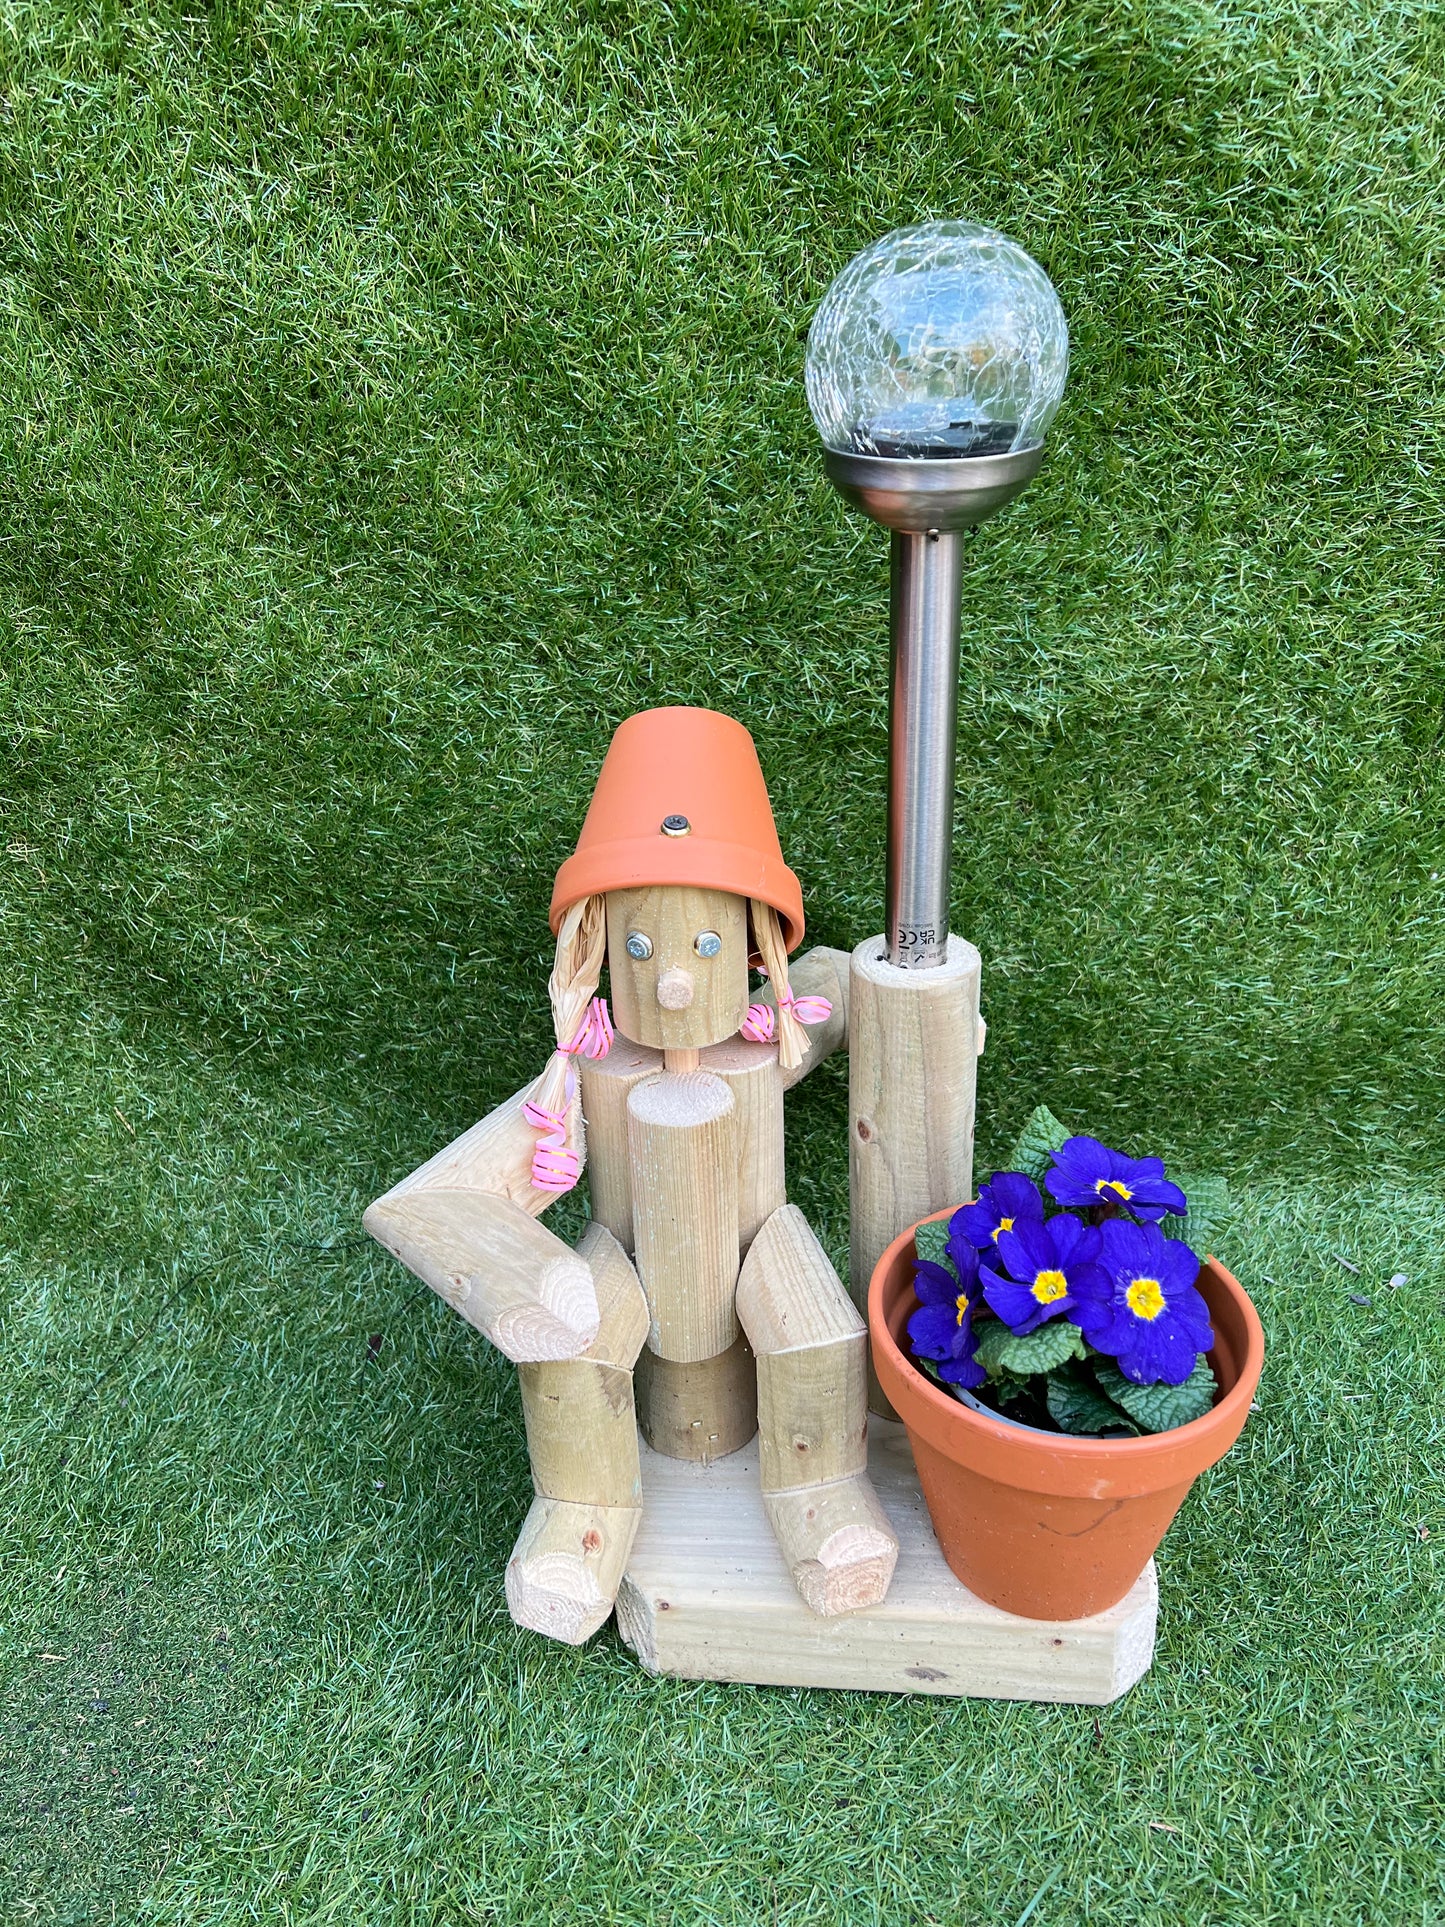 Small, sitting girl holding a pot with solar light